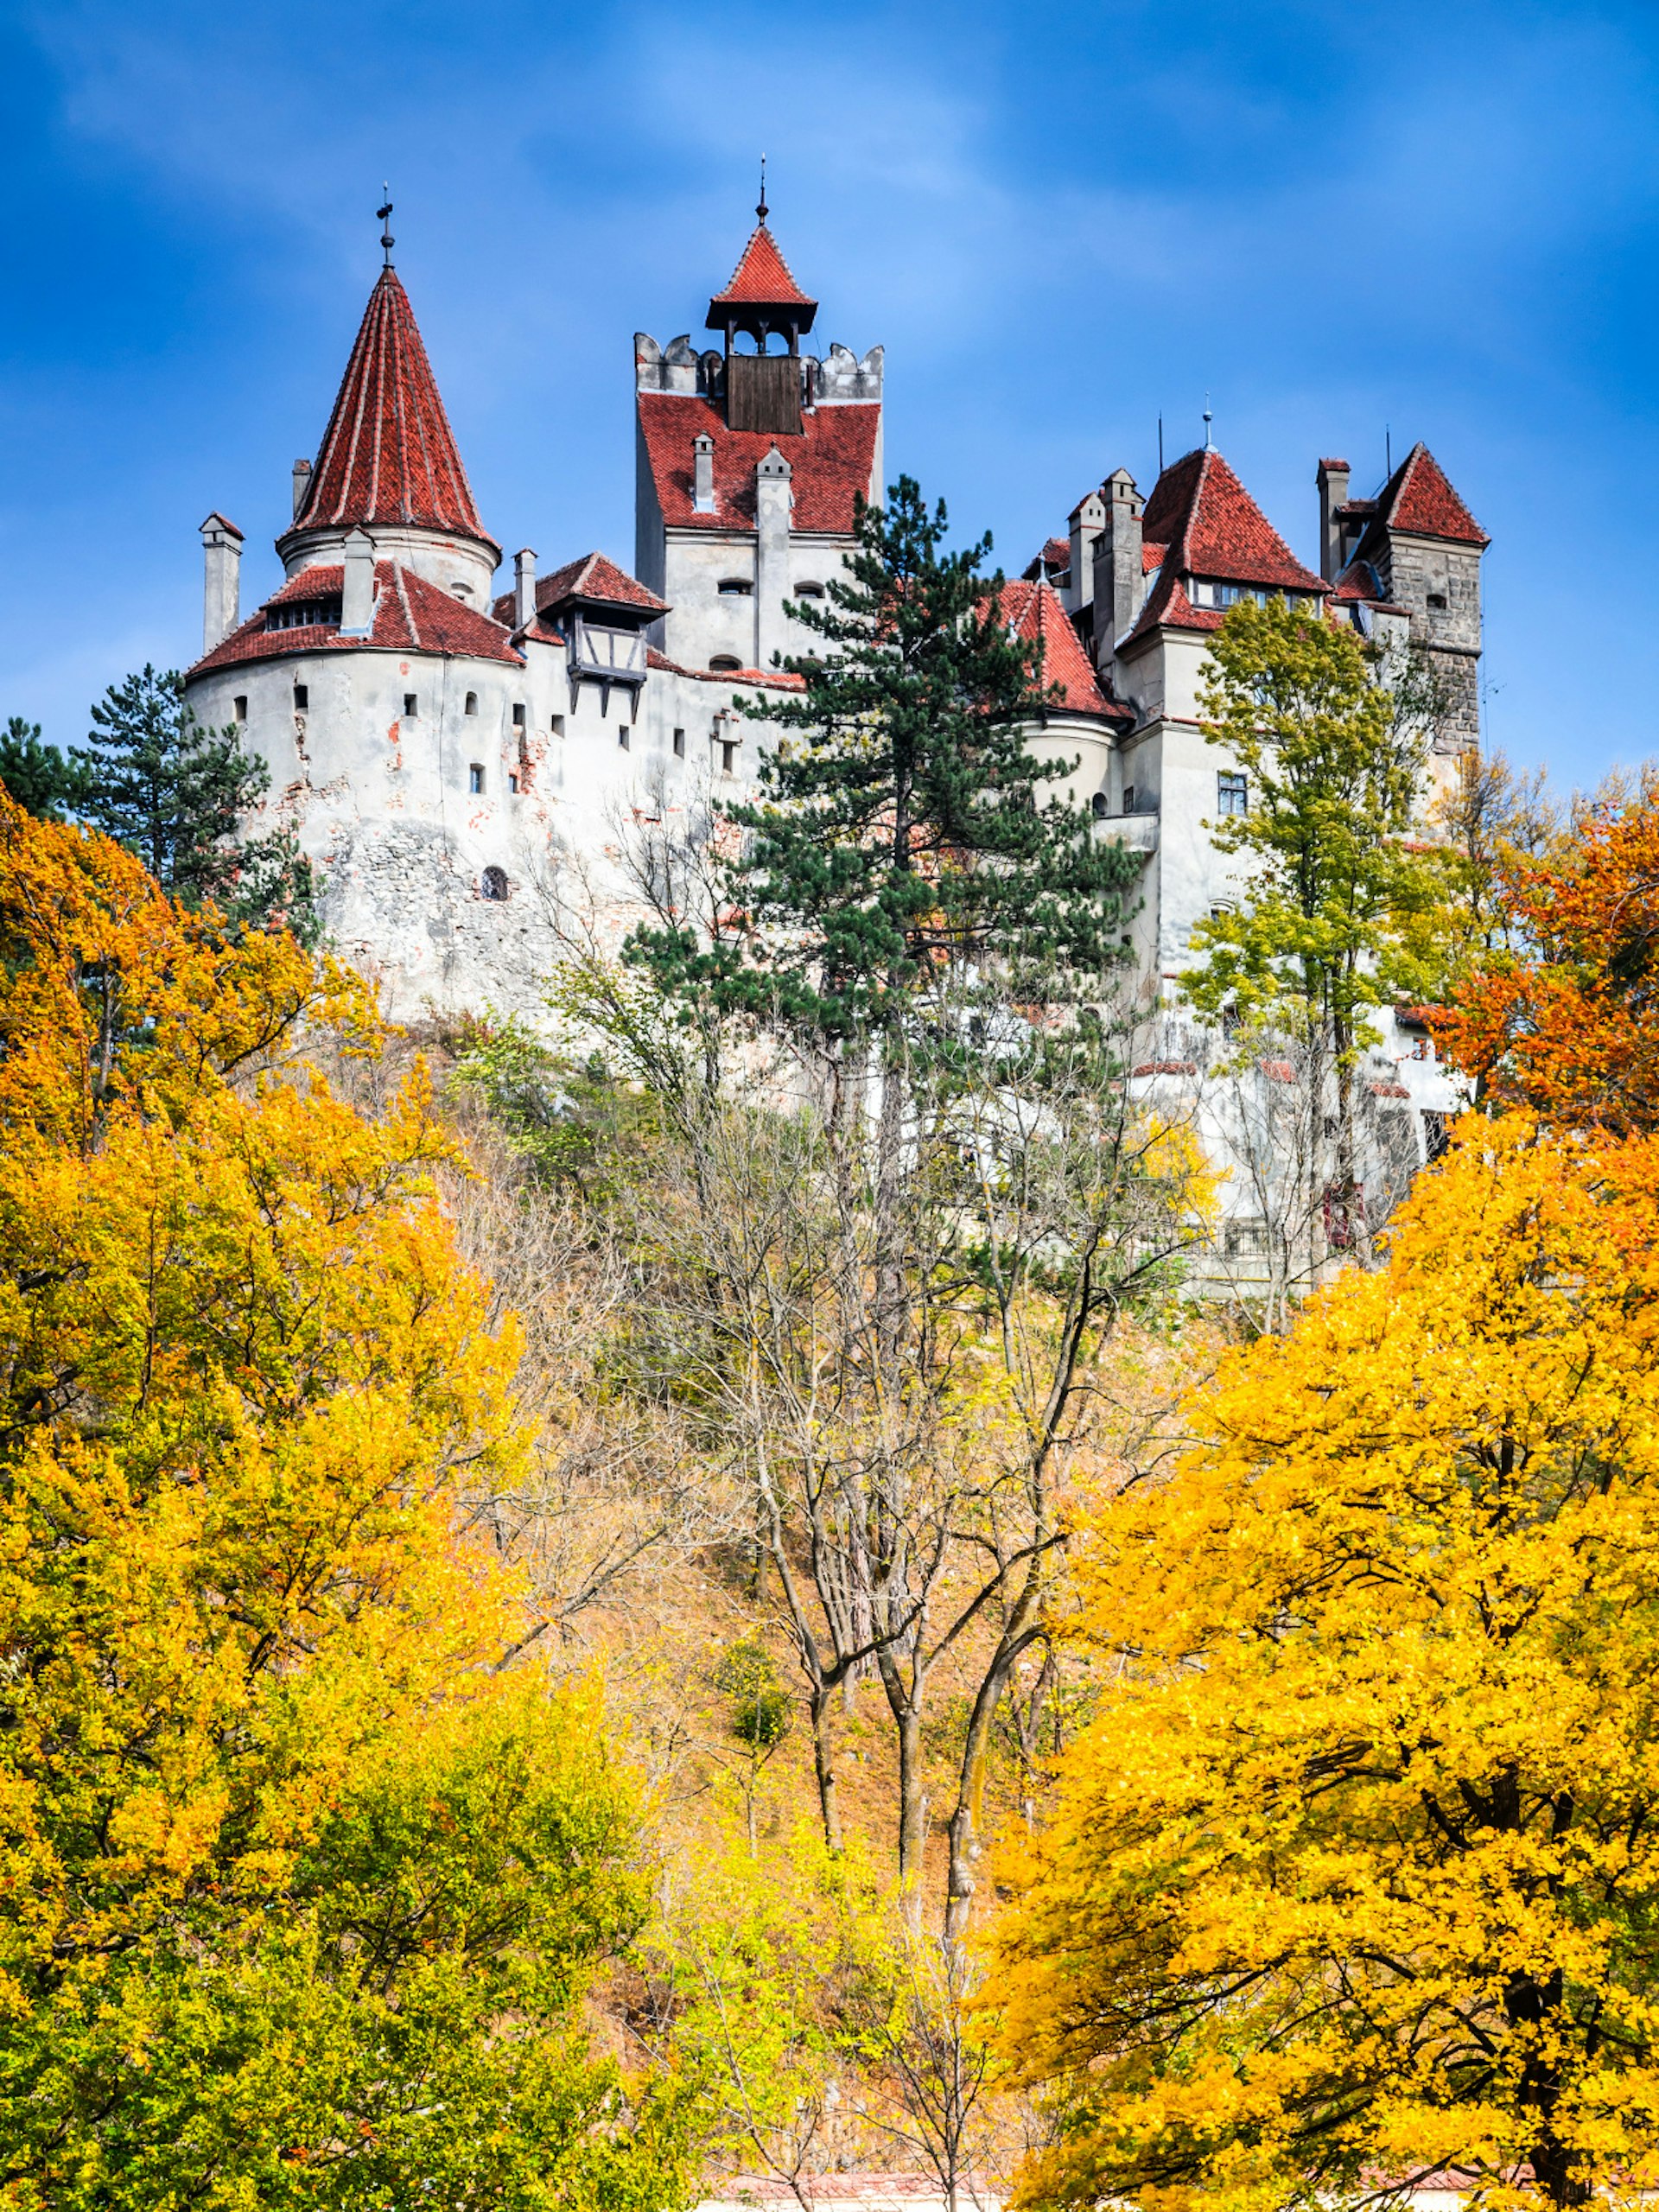 View of Bran Castle in Transylvania on an autumn day